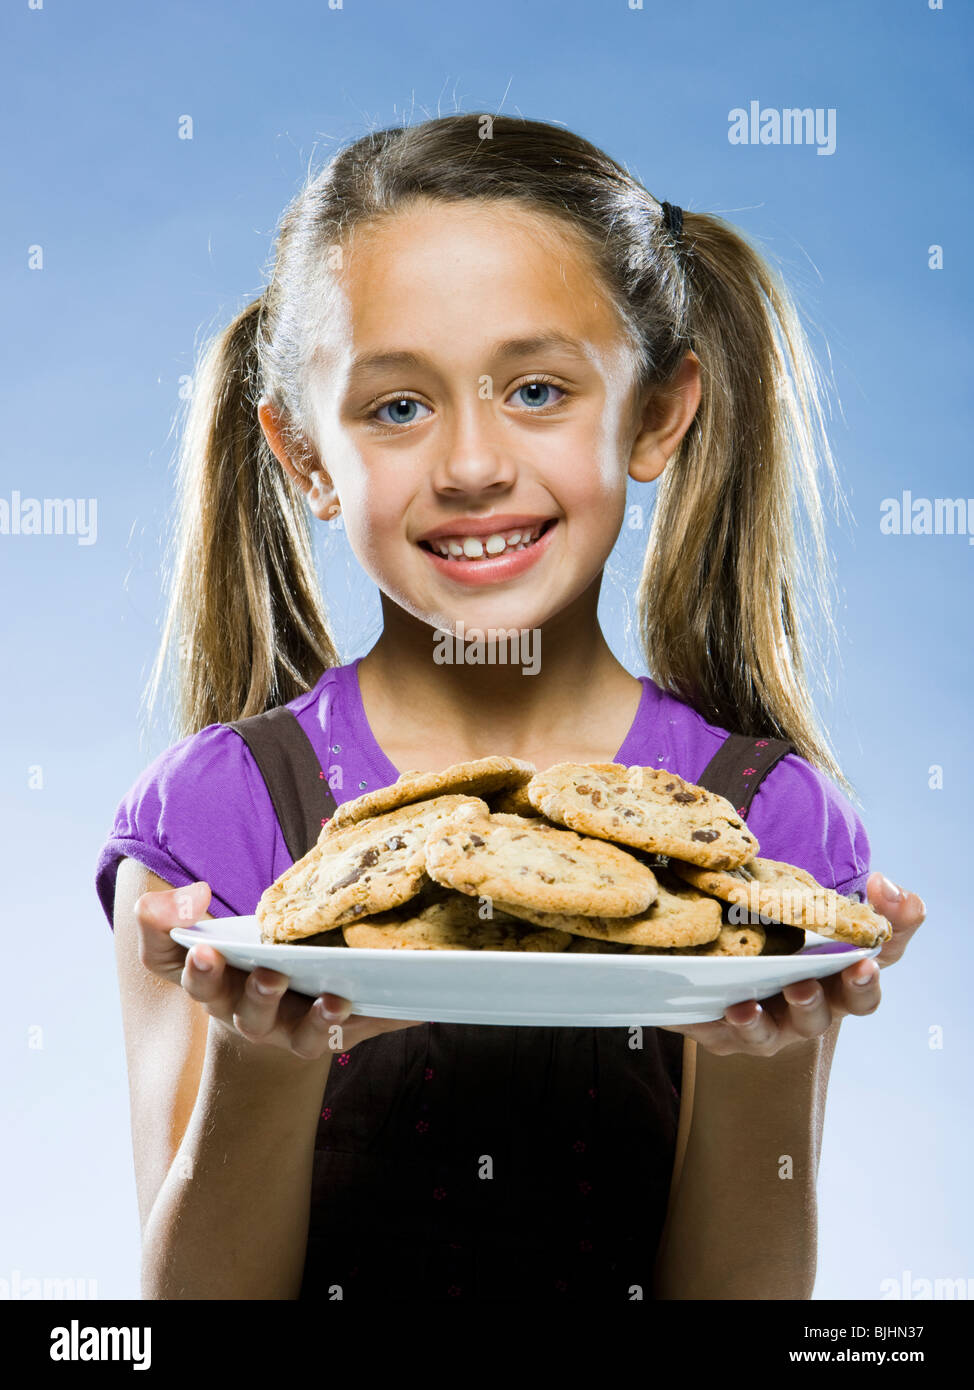 Girl looking at the camera holding a plate of chocolate chip cookies Banque D'Images